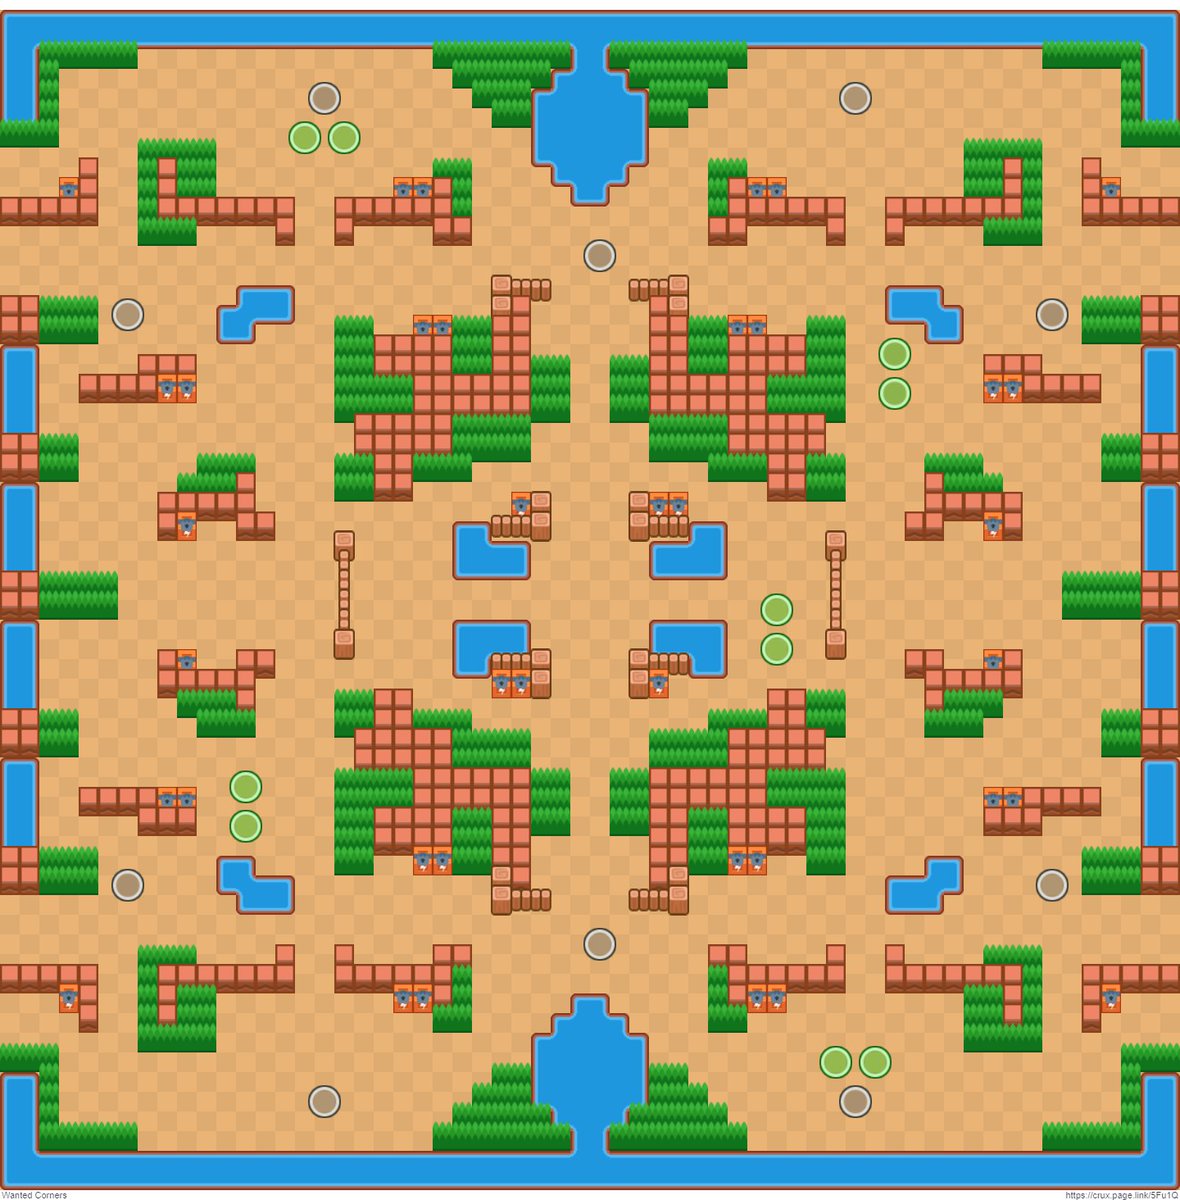 Moneycapital On Twitter My Showdown Map Wanted Corners I Love Showdown And This Is How I Would Create A Long Range Showdown Map Thoughts Brawlstars Frank Supercell I Would Love To Know Your